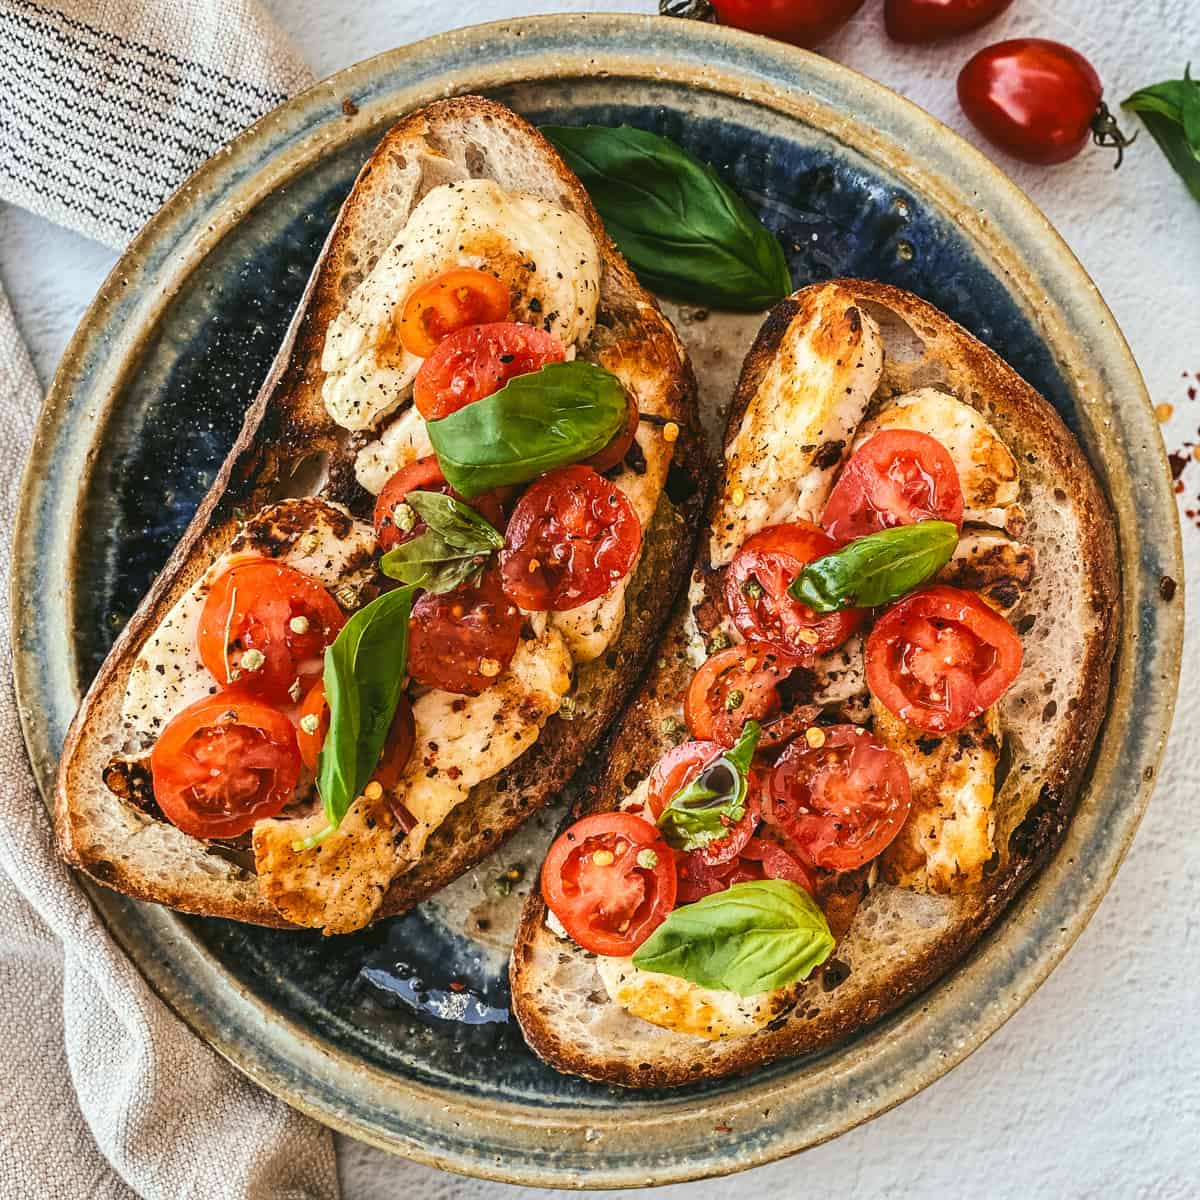 Fried halloumi and tomatoes on toast, on a plate with a cloth napkin, tomatoes and fresh herbs.